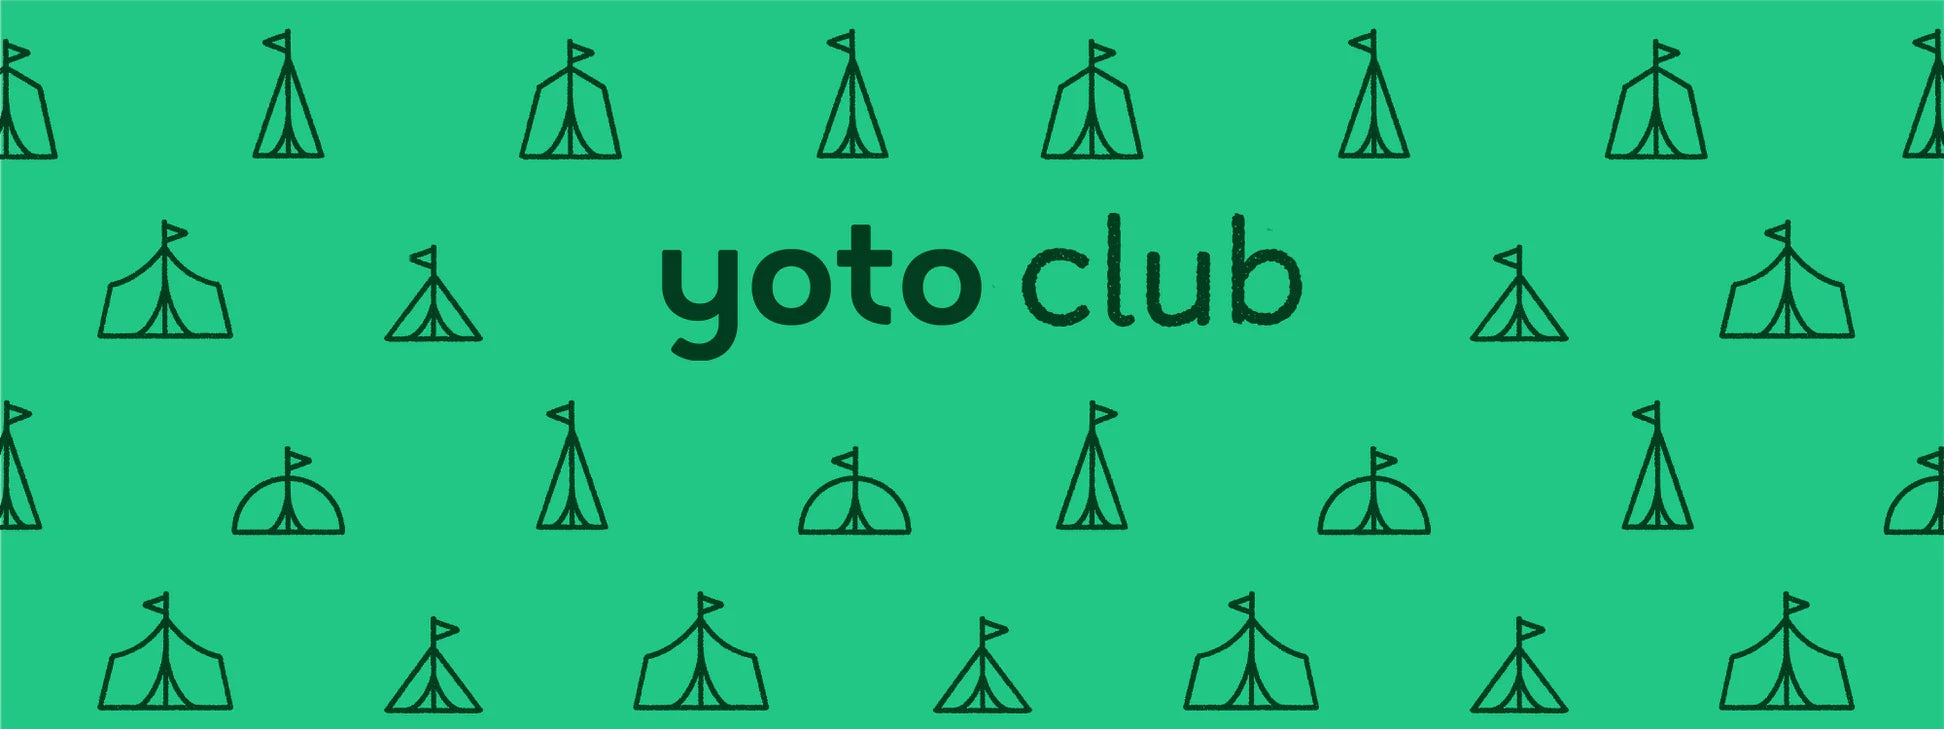 What’s new in Yoto Club this June